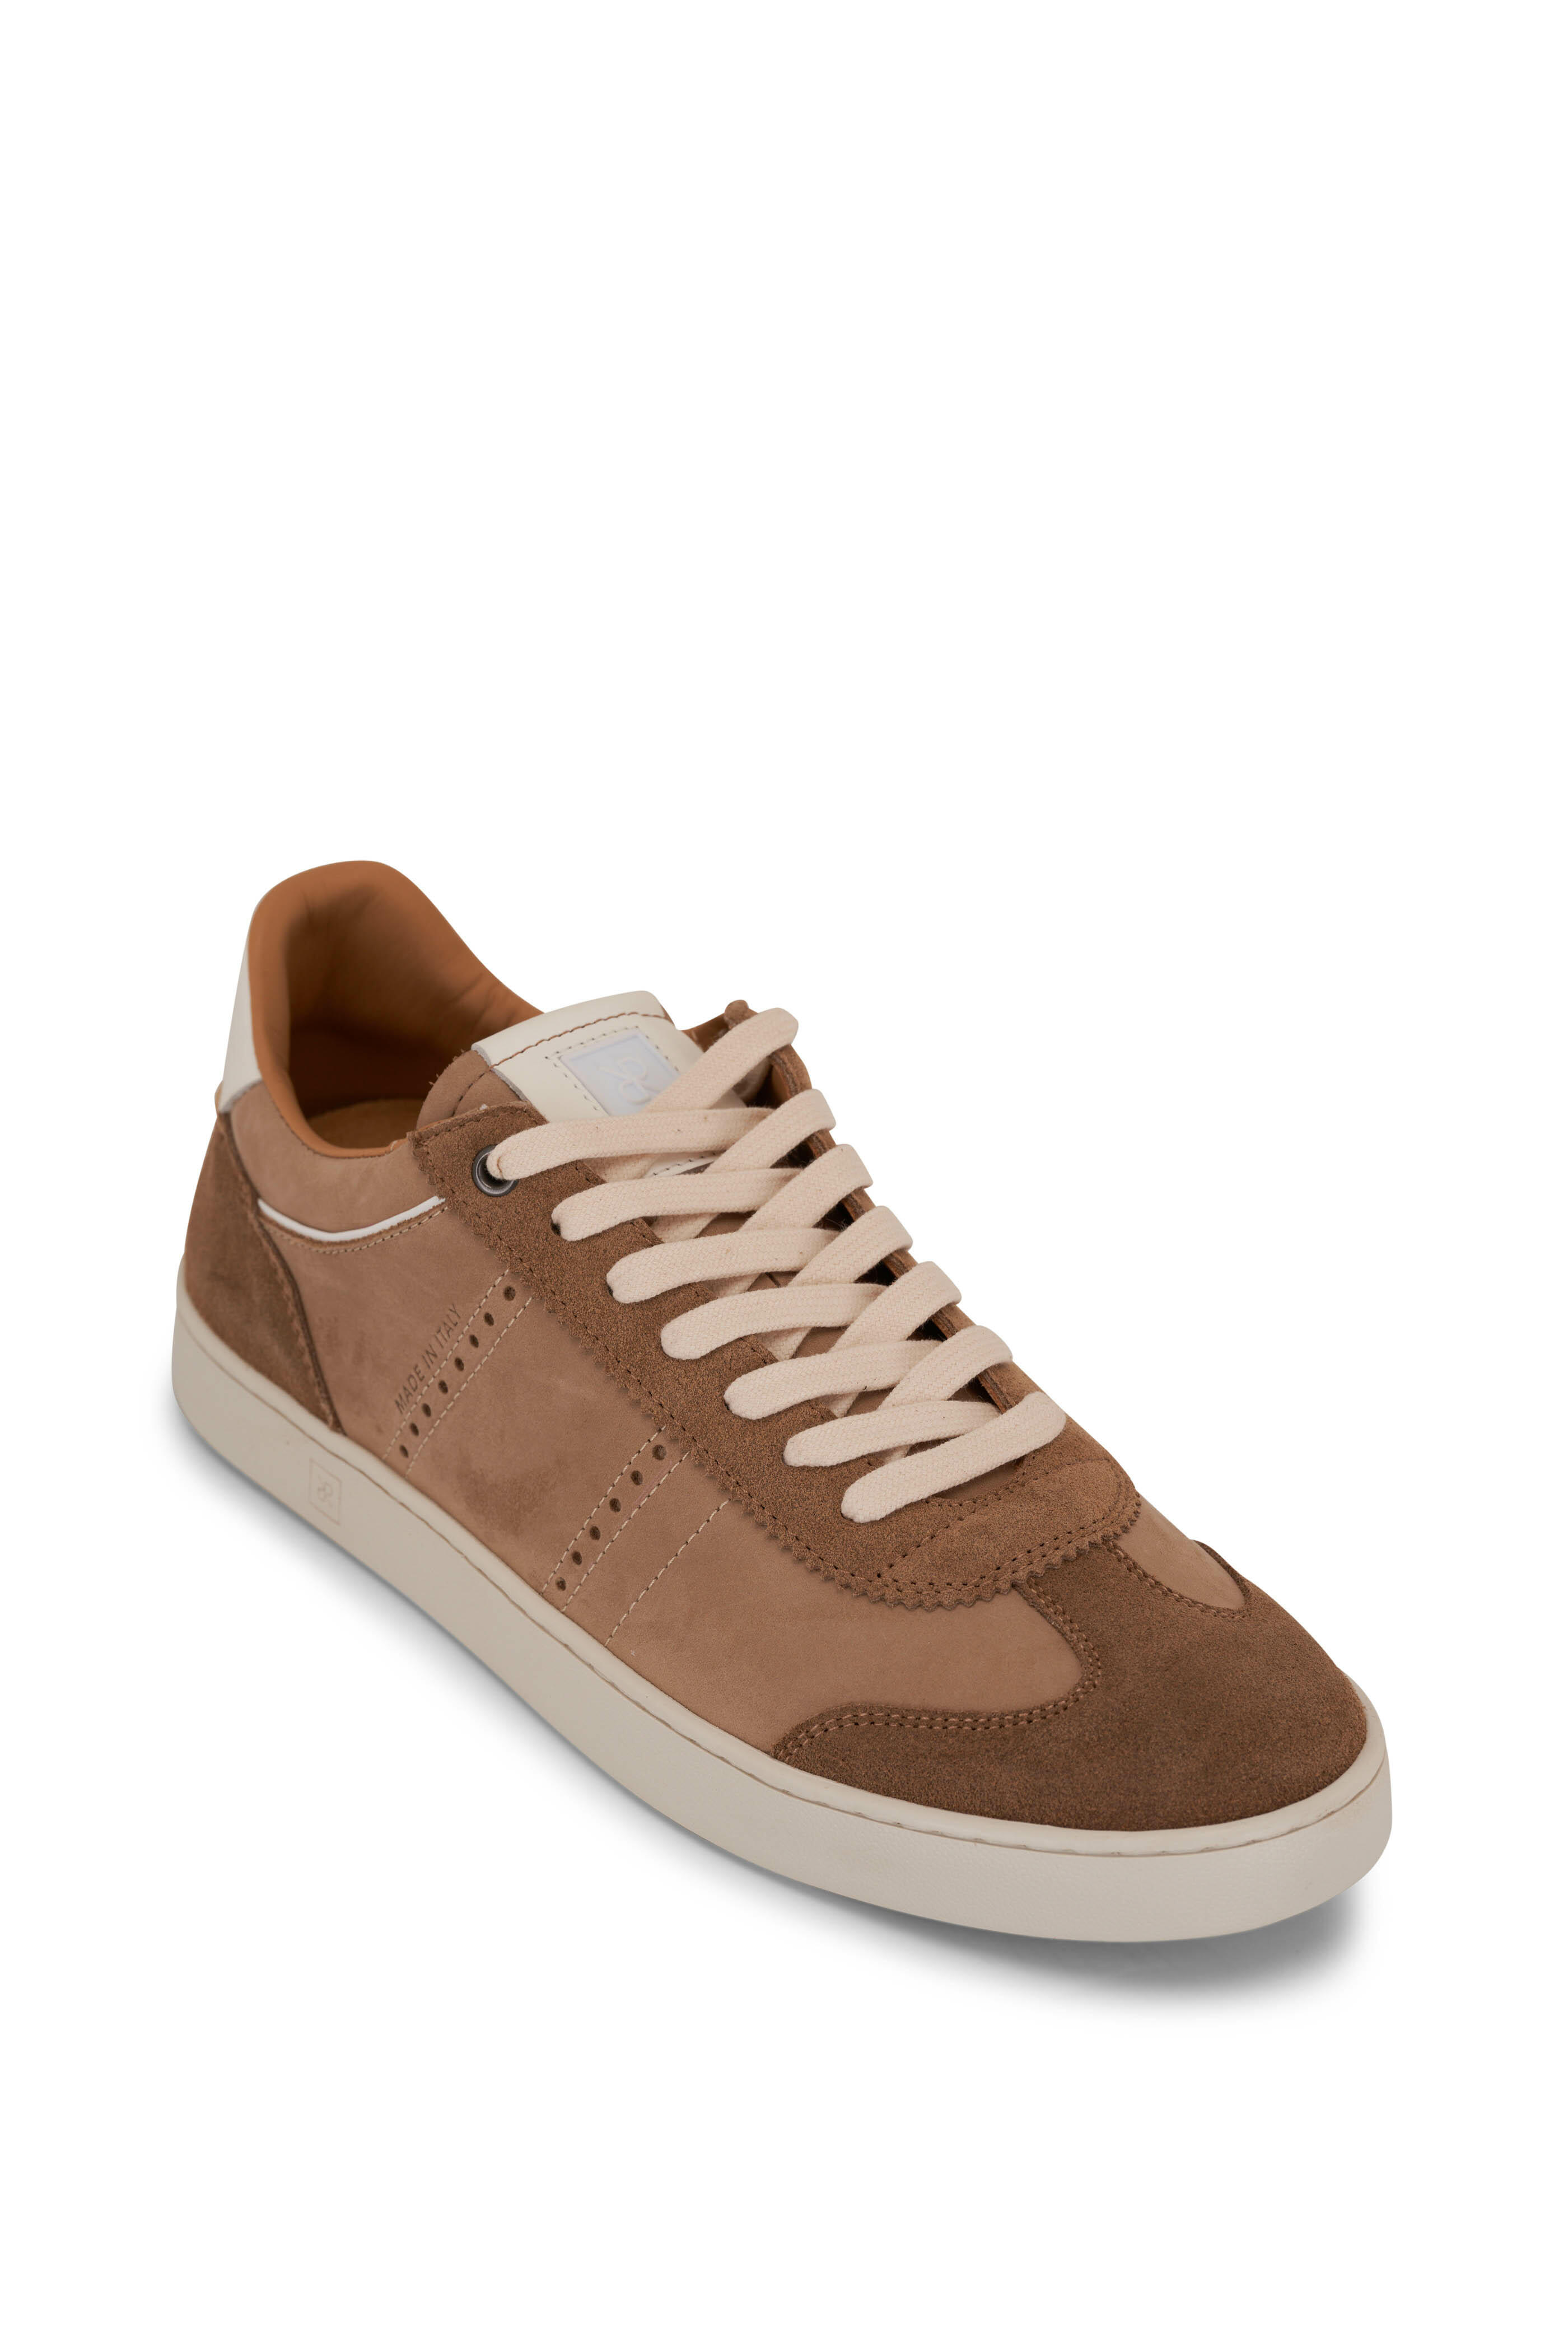 Rubirosa - Judy Taupe Leather & Suede Sneaker | Mitchell Stores